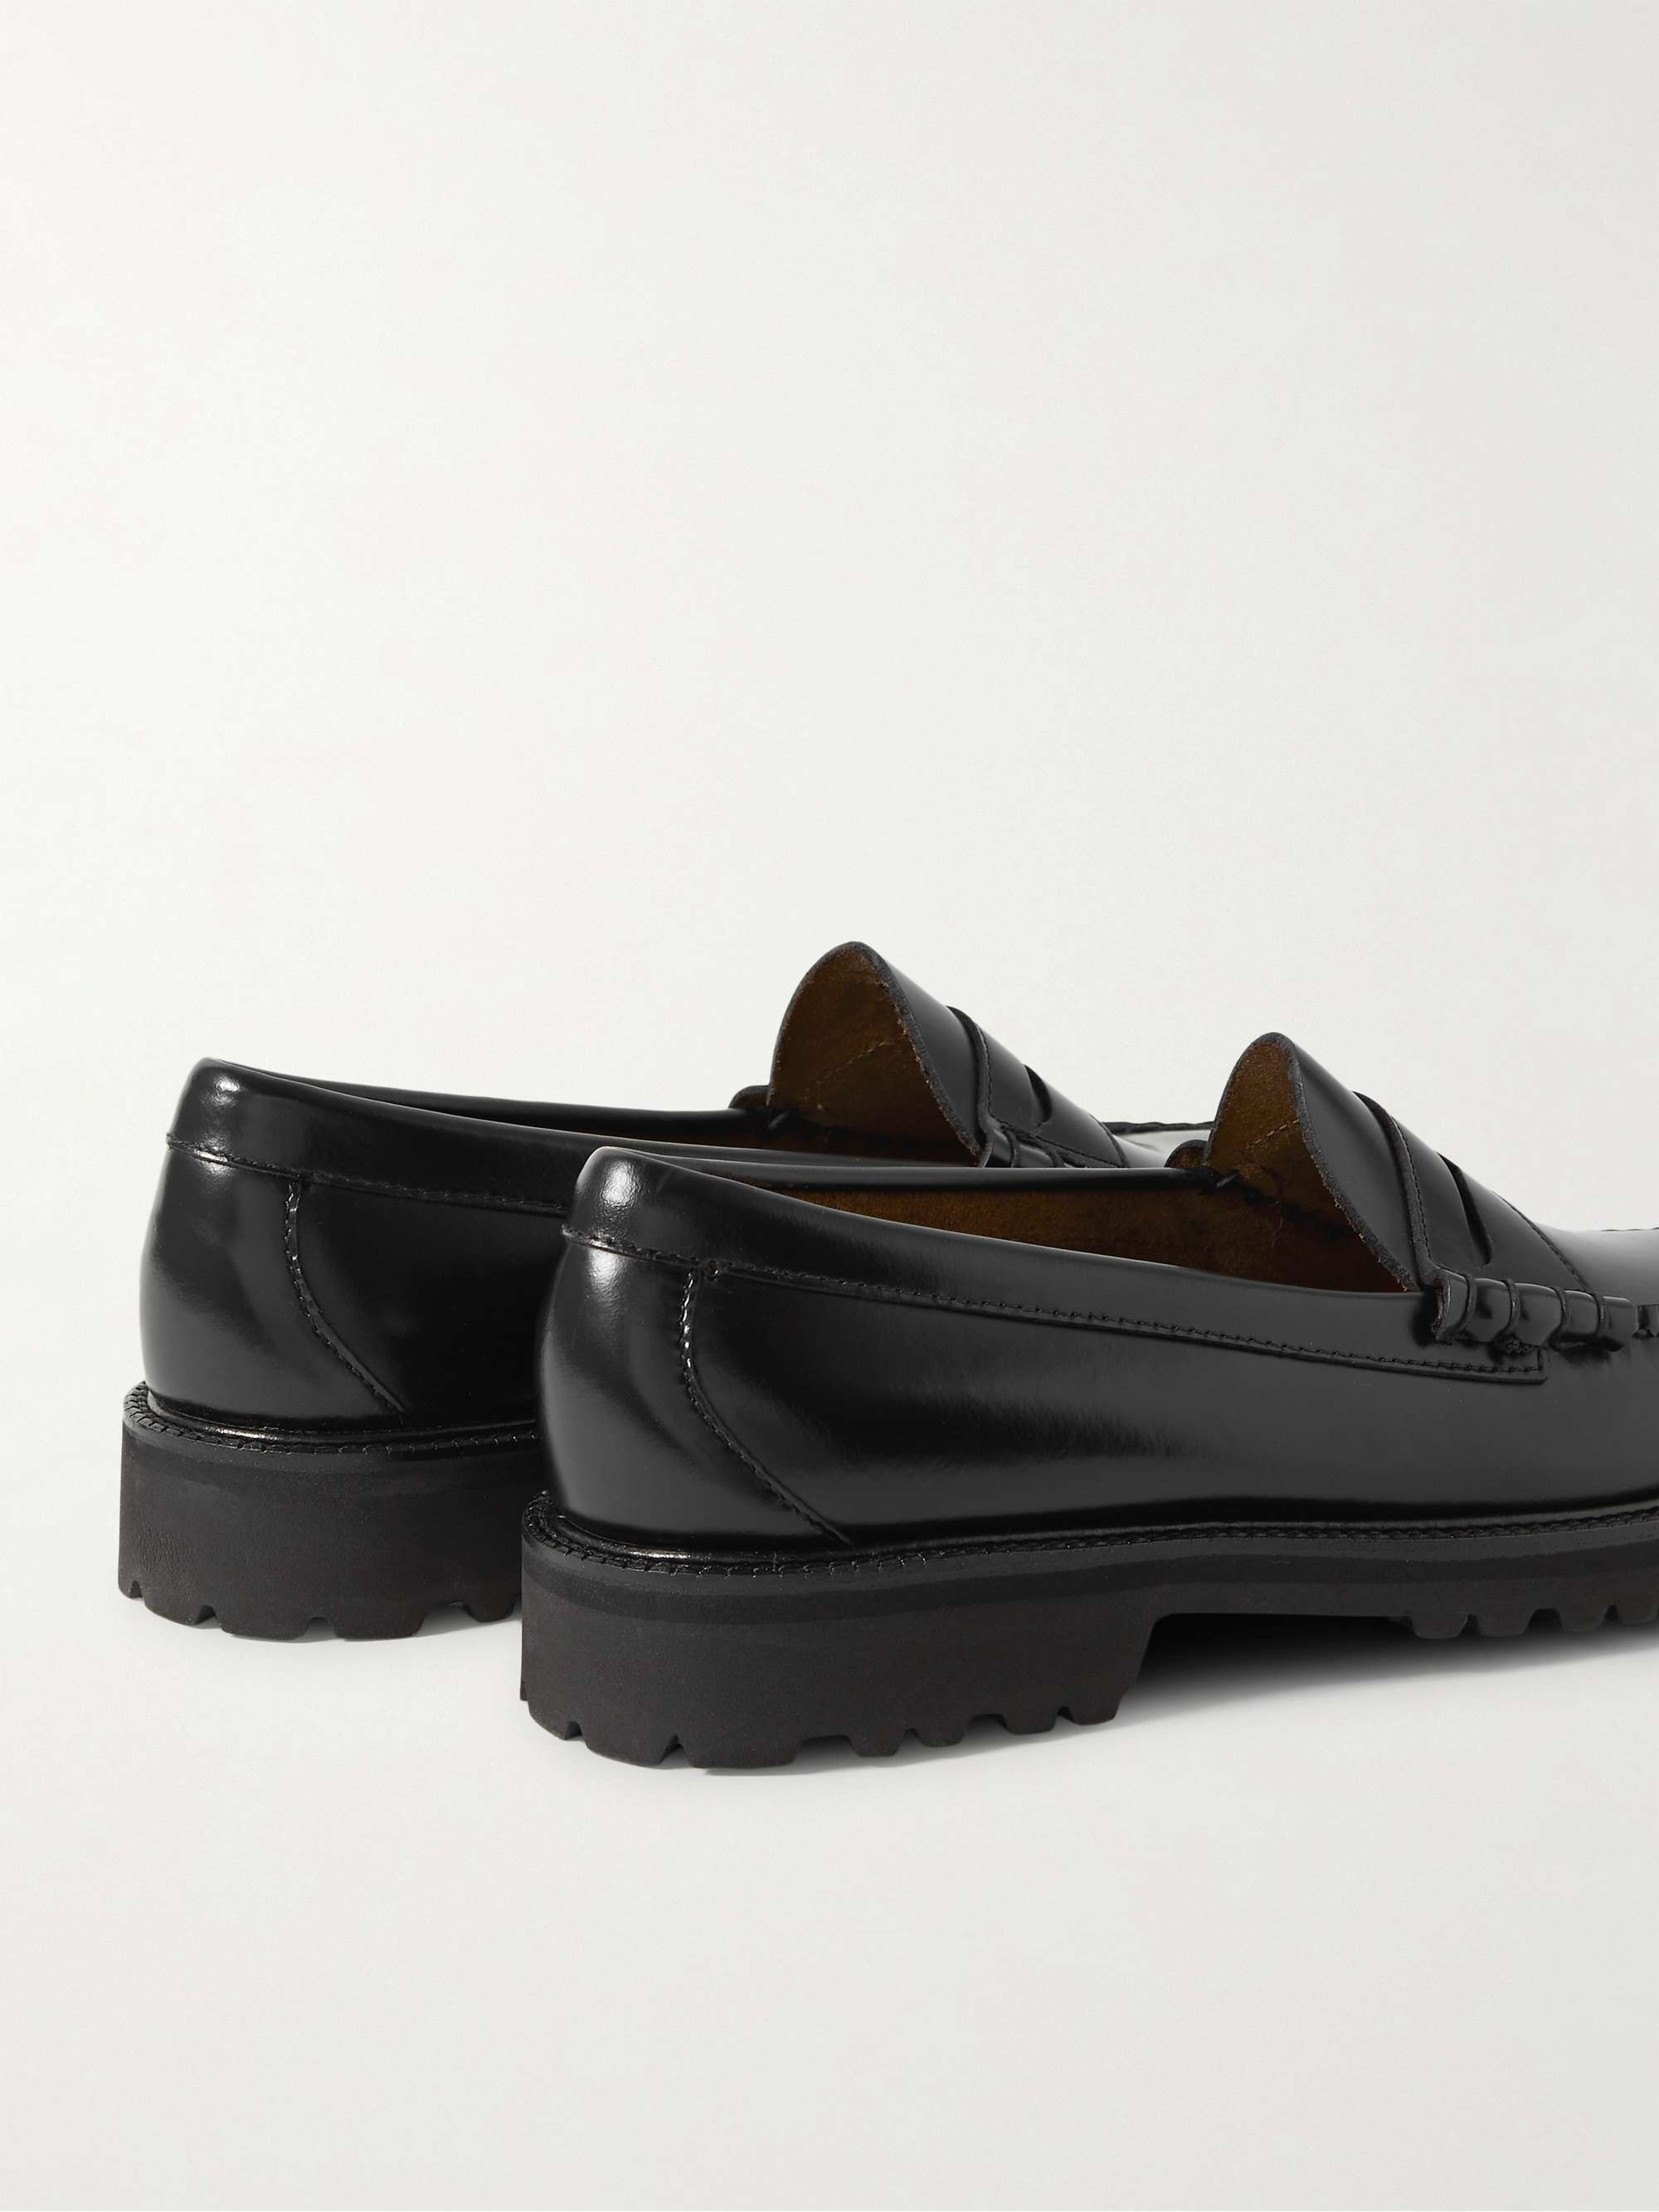 G.H. BASS & CO. Weejuns 90 Larson Leather Penny Loafers